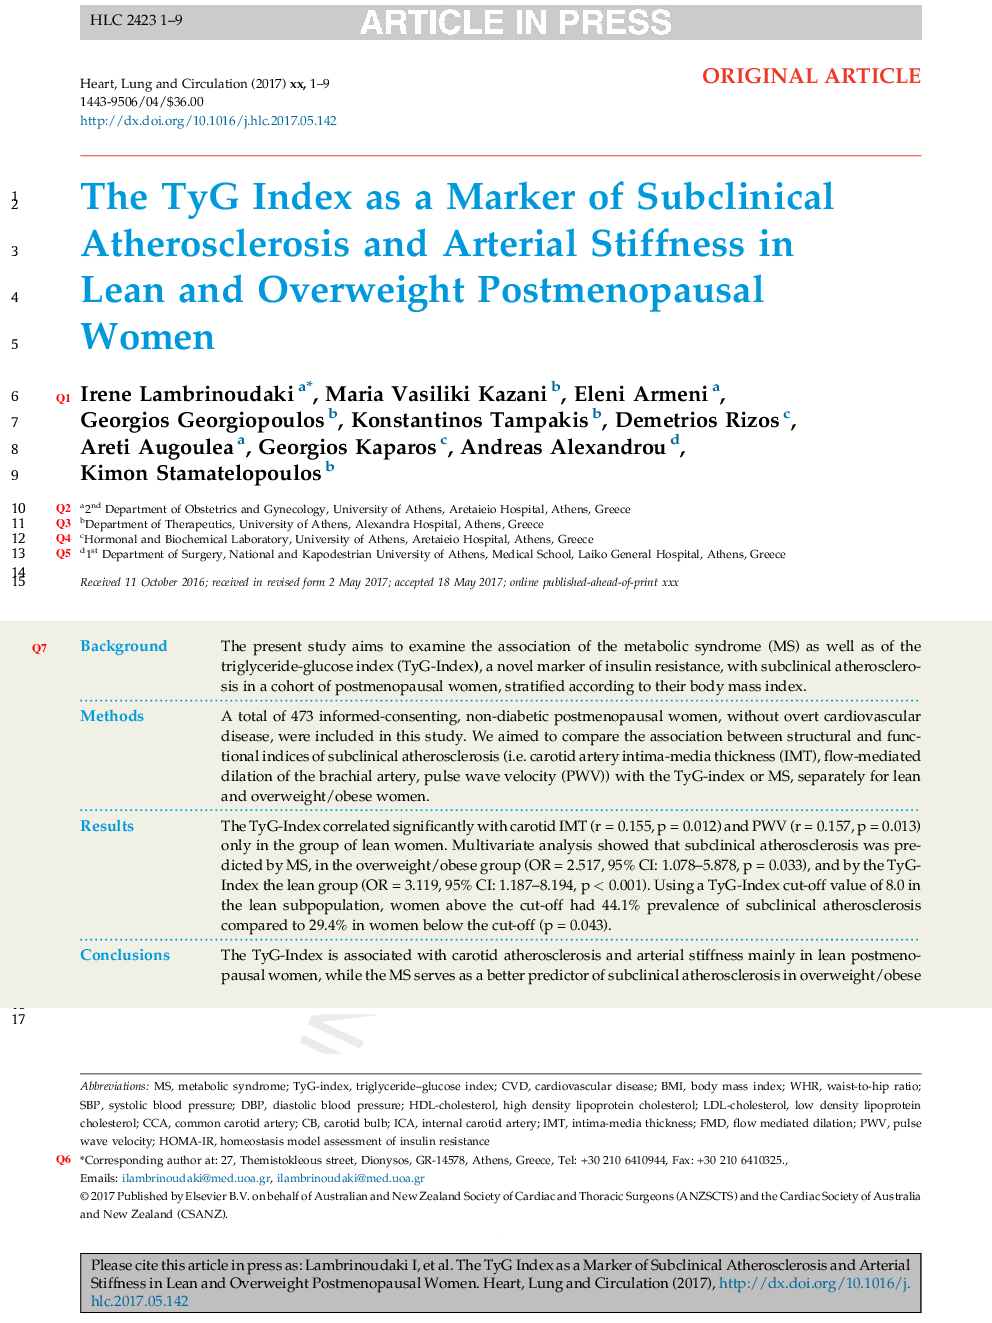 The TyG Index as a Marker of Subclinical Atherosclerosis and Arterial Stiffness in Lean and Overweight Postmenopausal Women